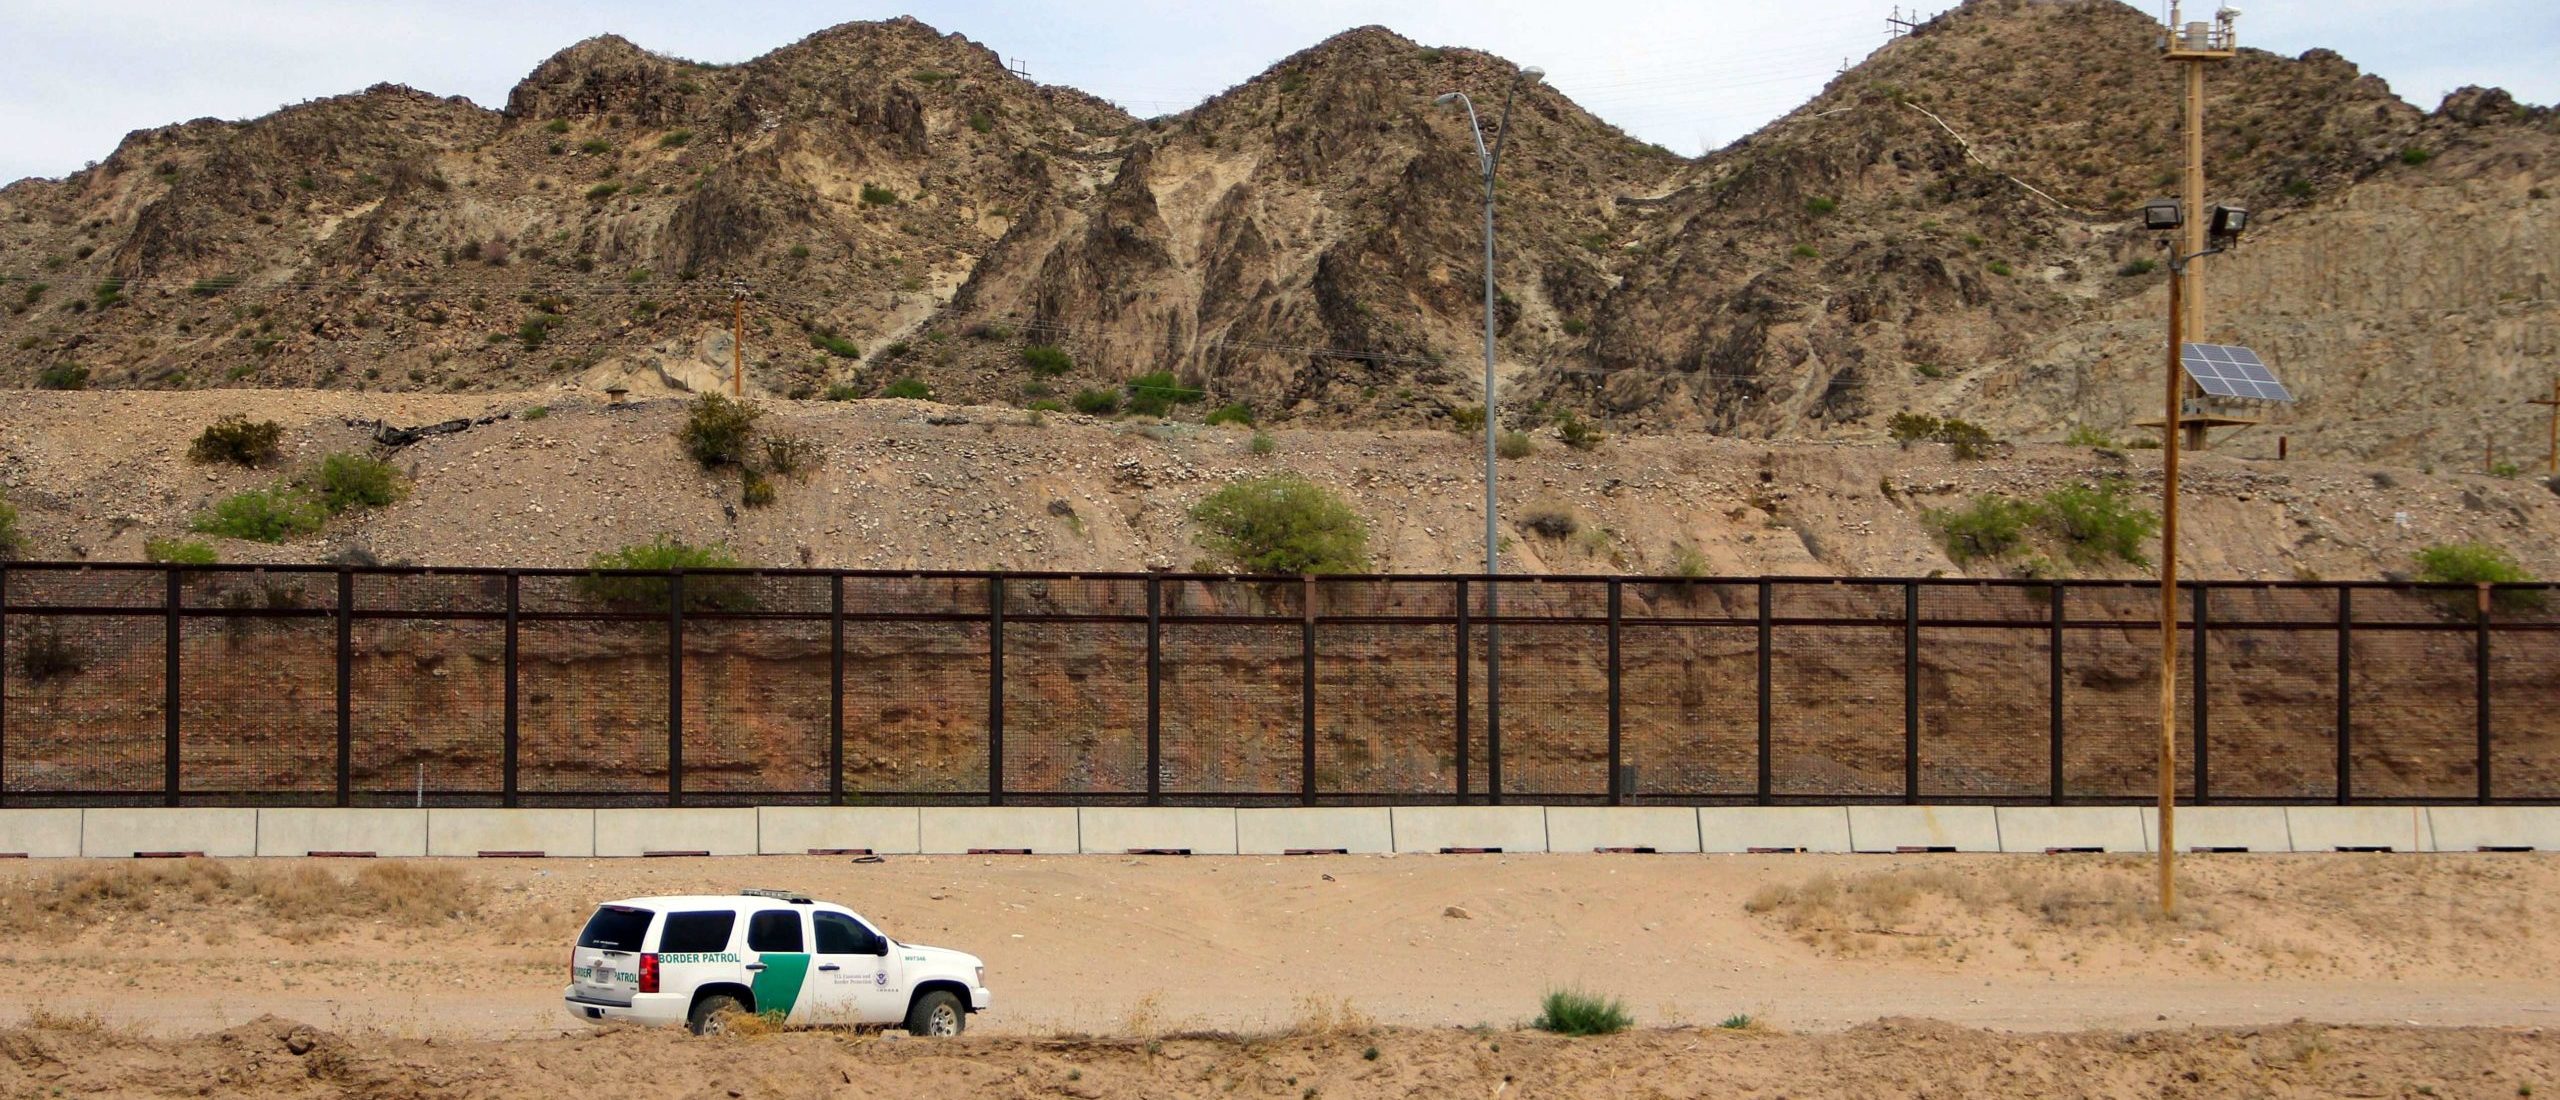 A US Border Patrol is seen from Mexico while patrolling along the border line between the cities of El Paso, Texas, in the United States, and Ciudad Juarez, Chihuahua state, Mexico on April 7, 2018. The US states of Texas and Arizona on Friday announced plans to send National Guard troops to the southern border with Mexico after President Donald Trump ordered a thousands-strong deployment to combat drug trafficking and illegal immigration. / AFP PHOTO / HERIKA MARTINEZ (Photo credit should read HERIKA MARTINEZ/AFP via Getty Images)